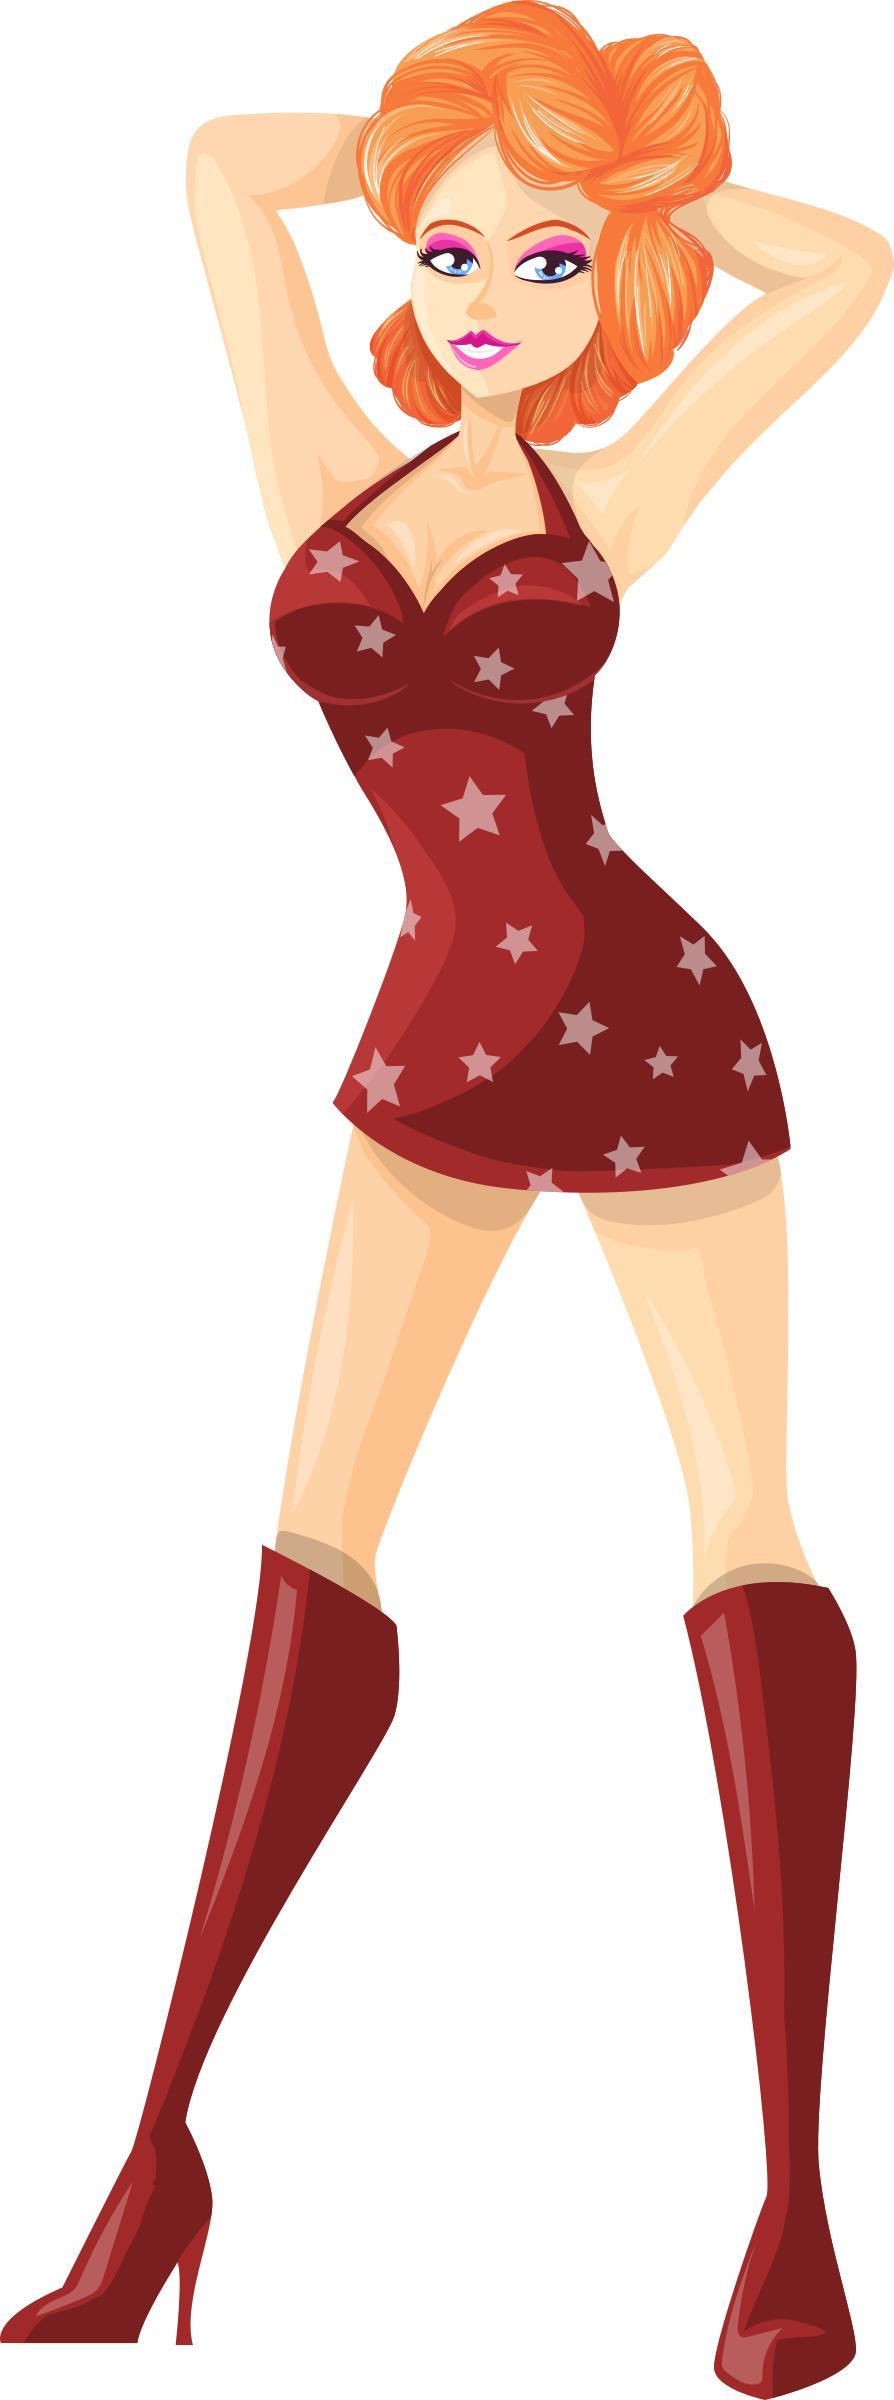 Young lady 2 (redhead, light skin, starry dress #5) png transparent